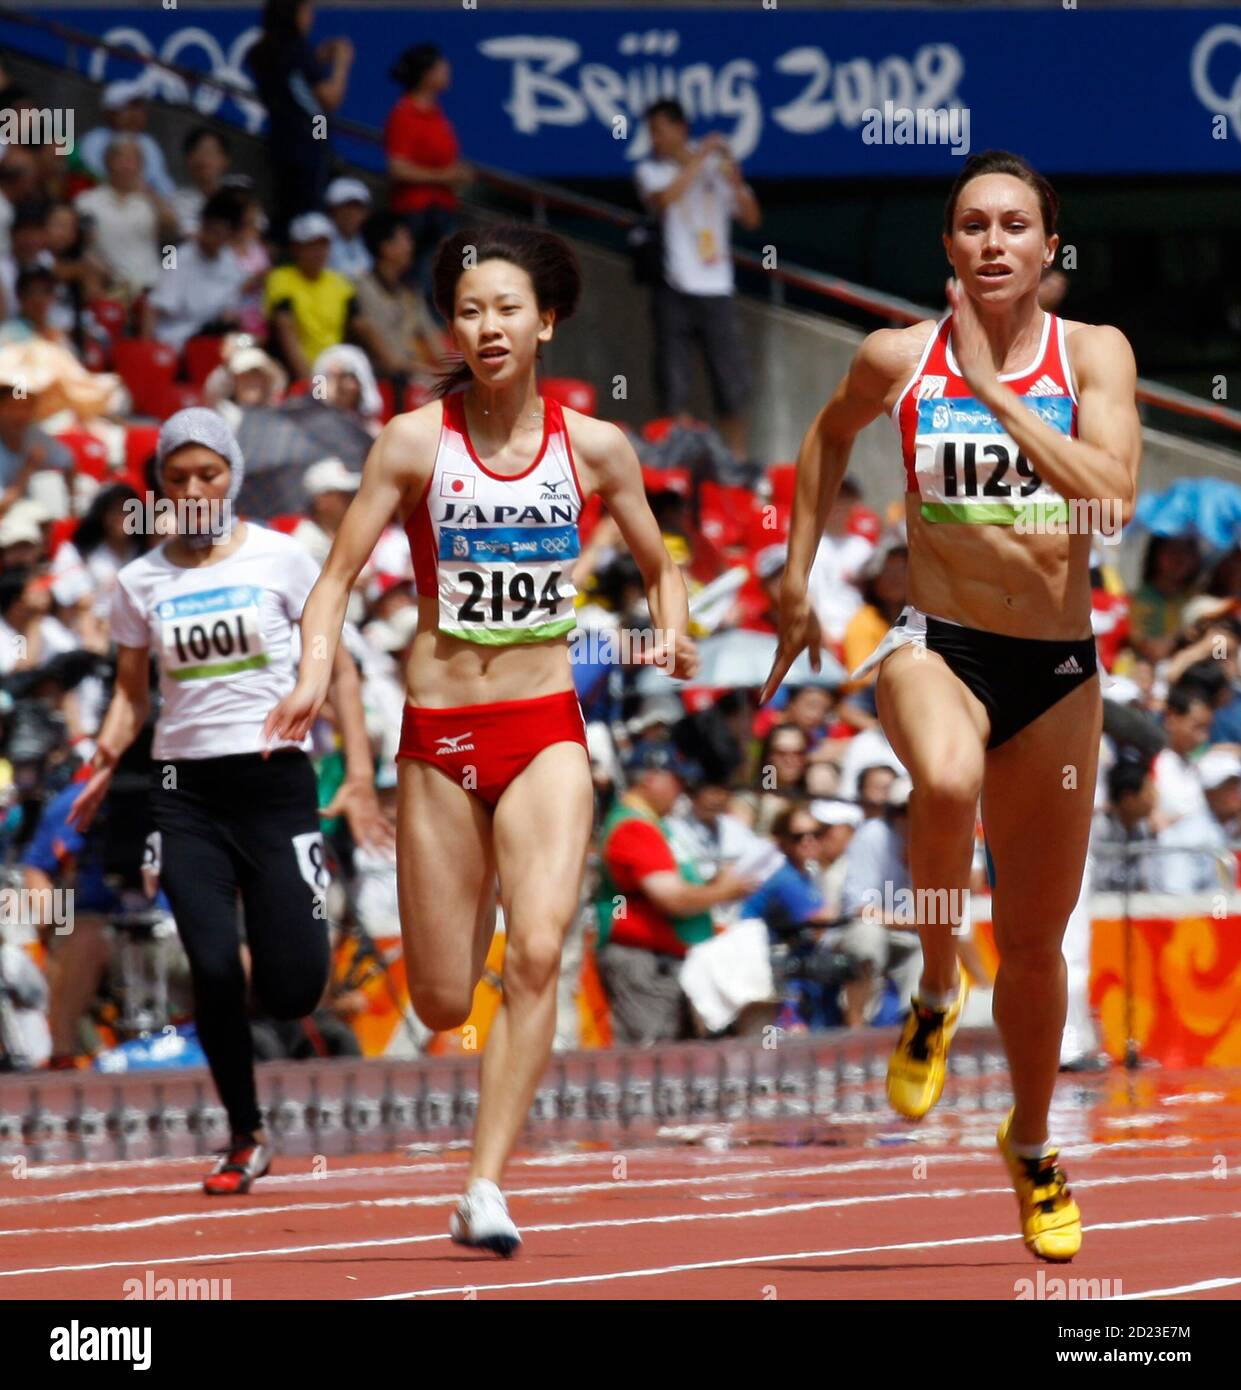 Chisato Fukushima of Japan (C) and Kim Gevaert of Belgium (R) sprint past  Robina Muqimyar of Afghanistan in their women's 100m heat in the athletics  competition of the Beijing 2008 Olympic Games